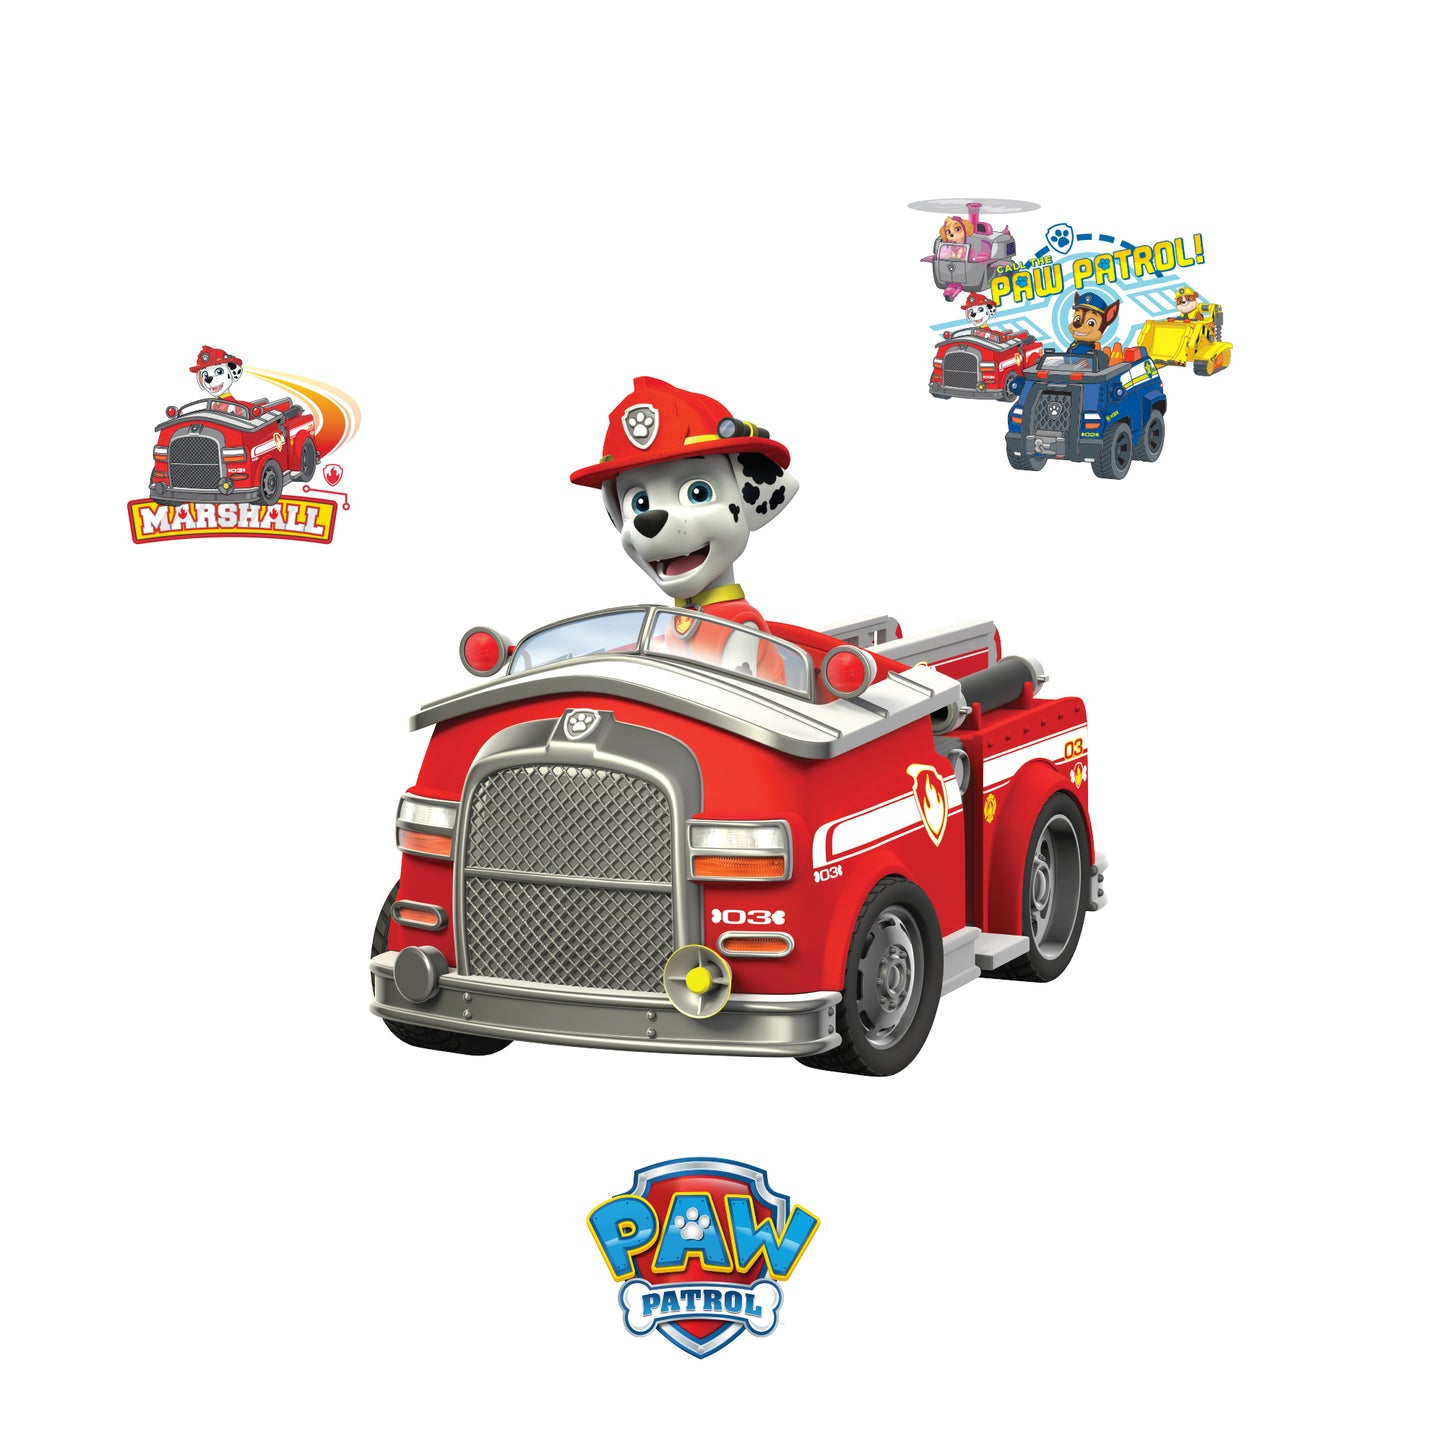 Paw Patrol: Marshall Vehicle RealBig - Officially Licensed Nickelodeon  Removable Adhesive Decal